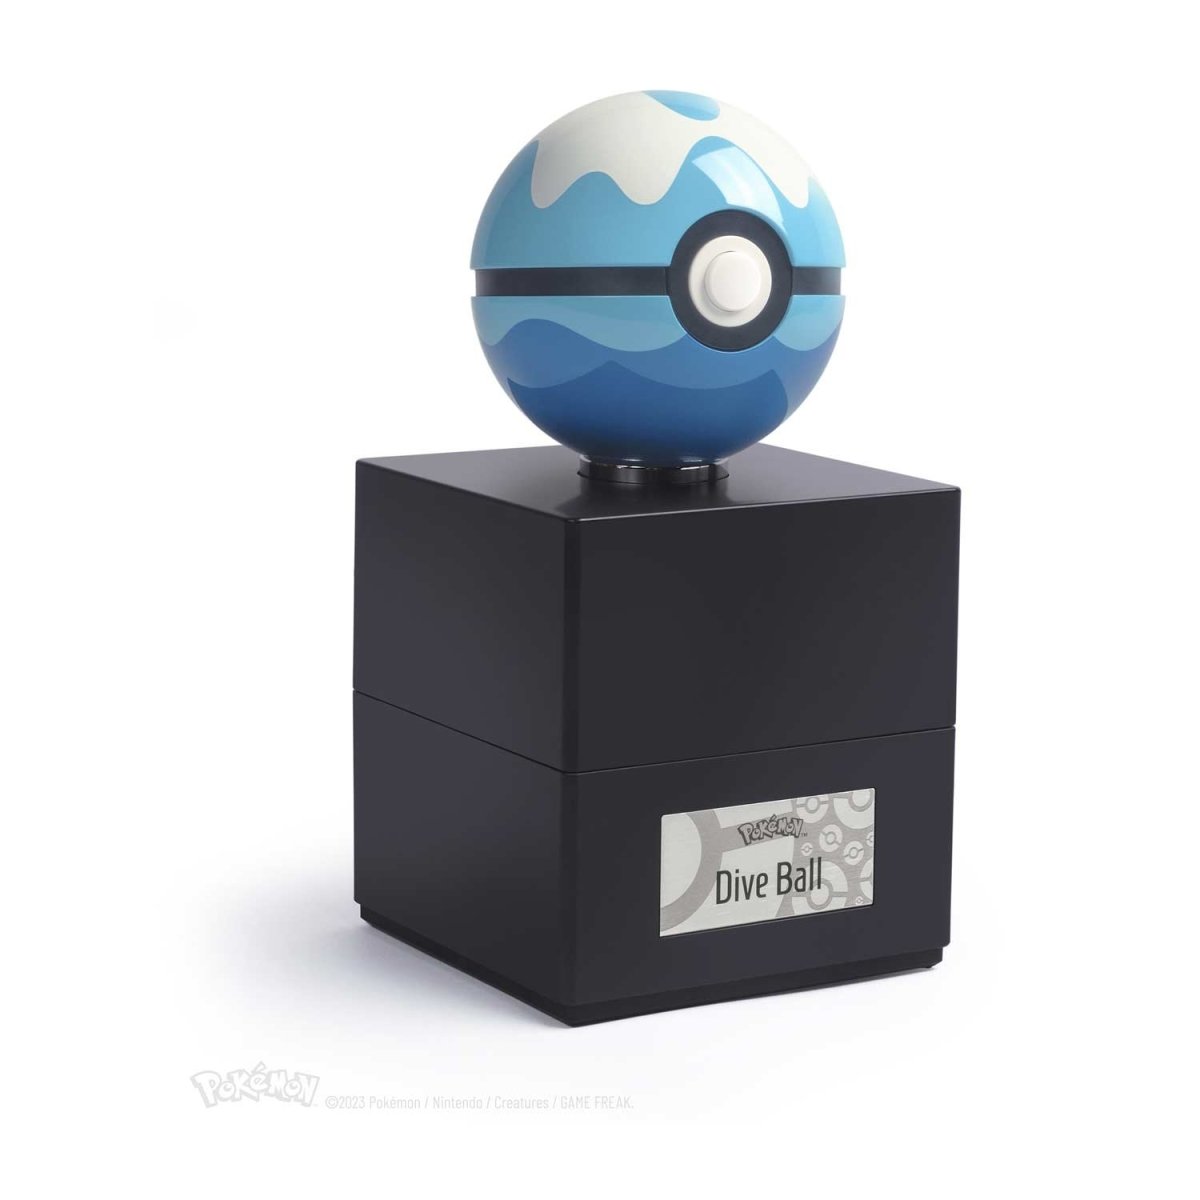 Dive Ball by The Wand Company Pokémon Center Official Site